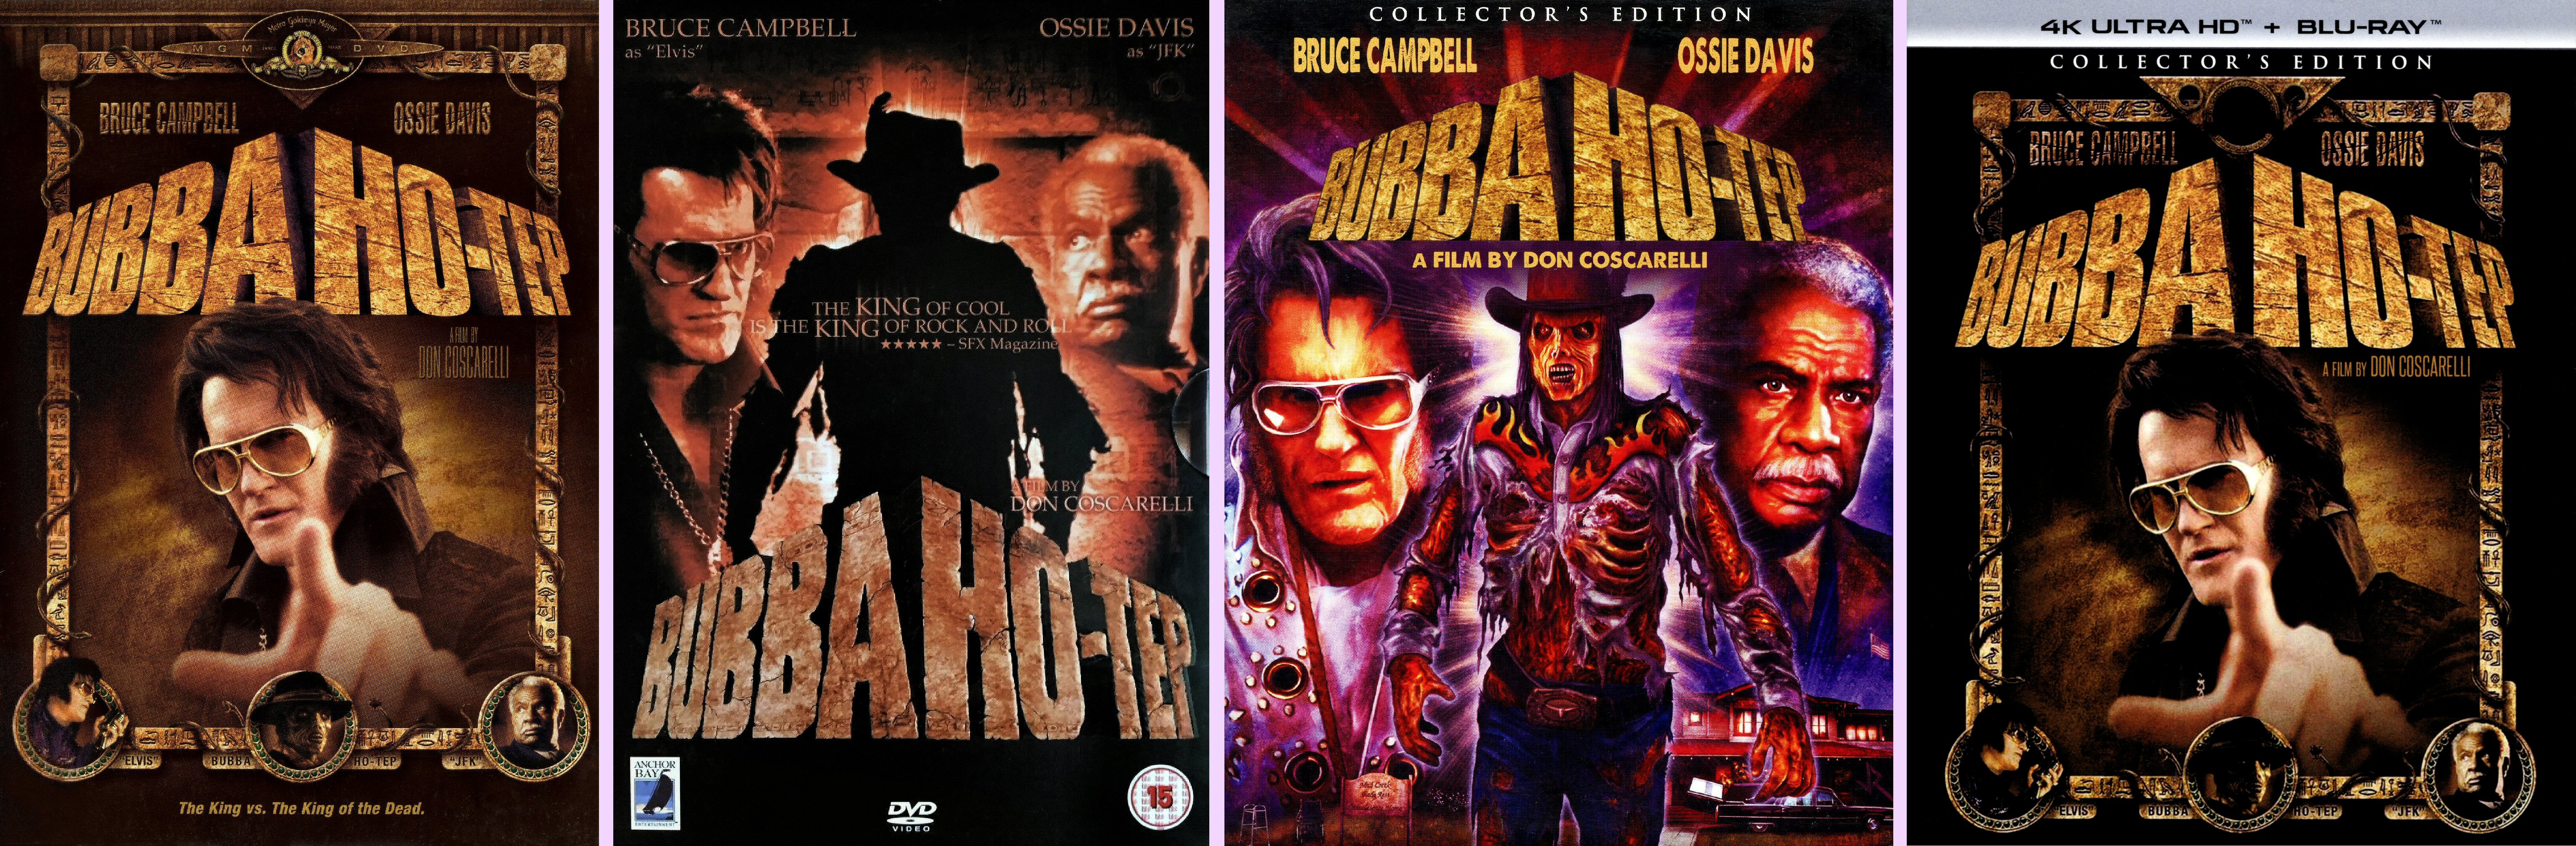 DVD Exotica: Bubba Ho-Tep's Much Needed 4k Restoration